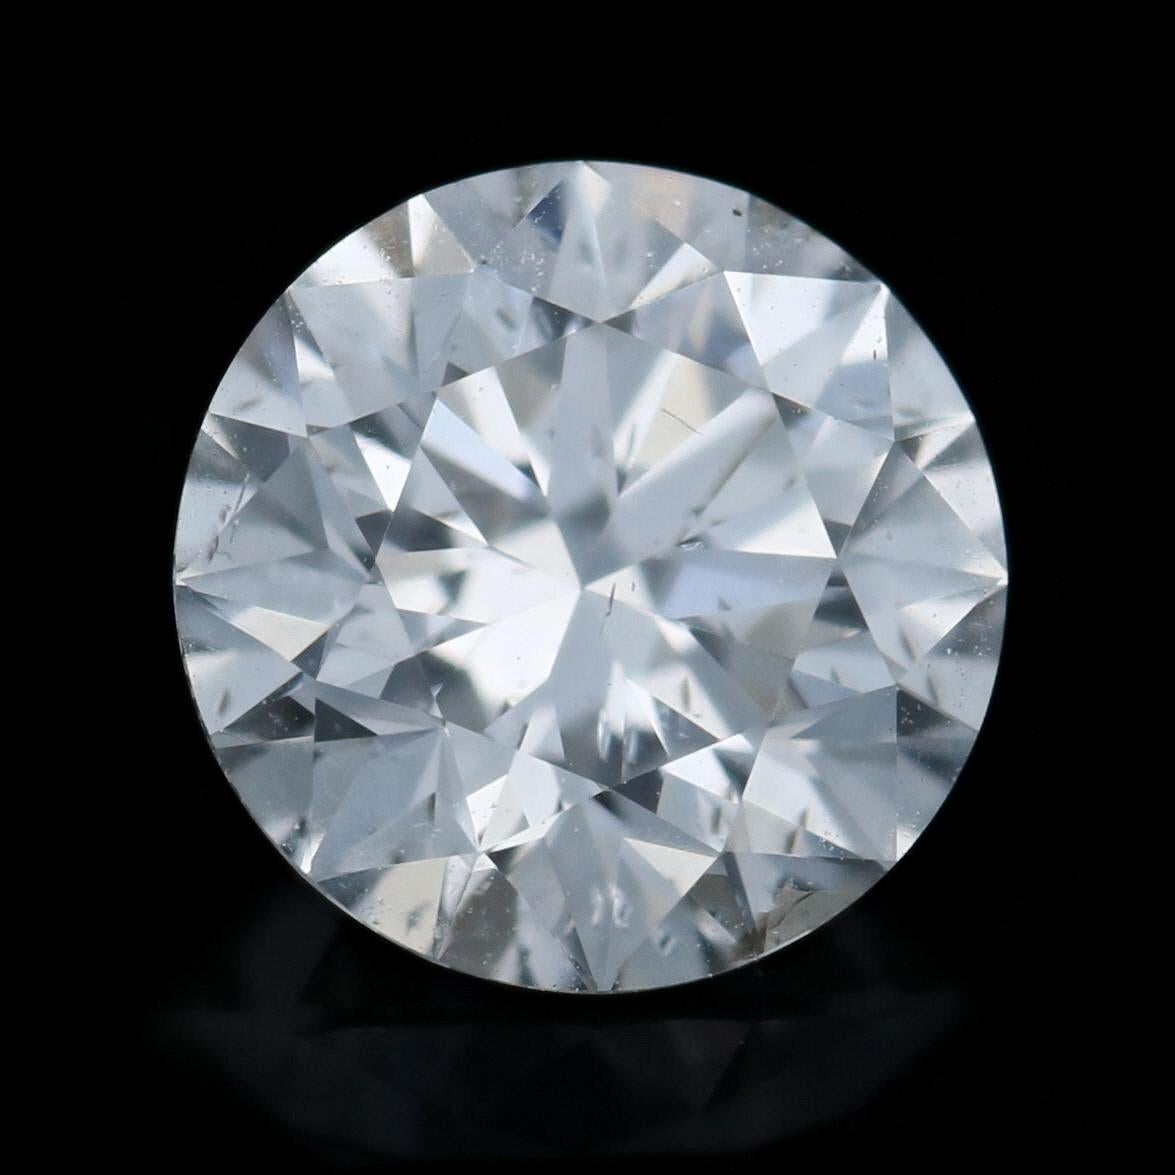 Weight: 1.63ct
Cut: Round Brilliant 
Color: G   
Clarity: I1 
Dimensions (mm): 7.48 - 7.49 x 4.74 

Cut: Excellent
Polish: Very Good
Symmetry: Excellent

GIA Report Number: 2211233317 

Condition: New  

Please check out the enlarged